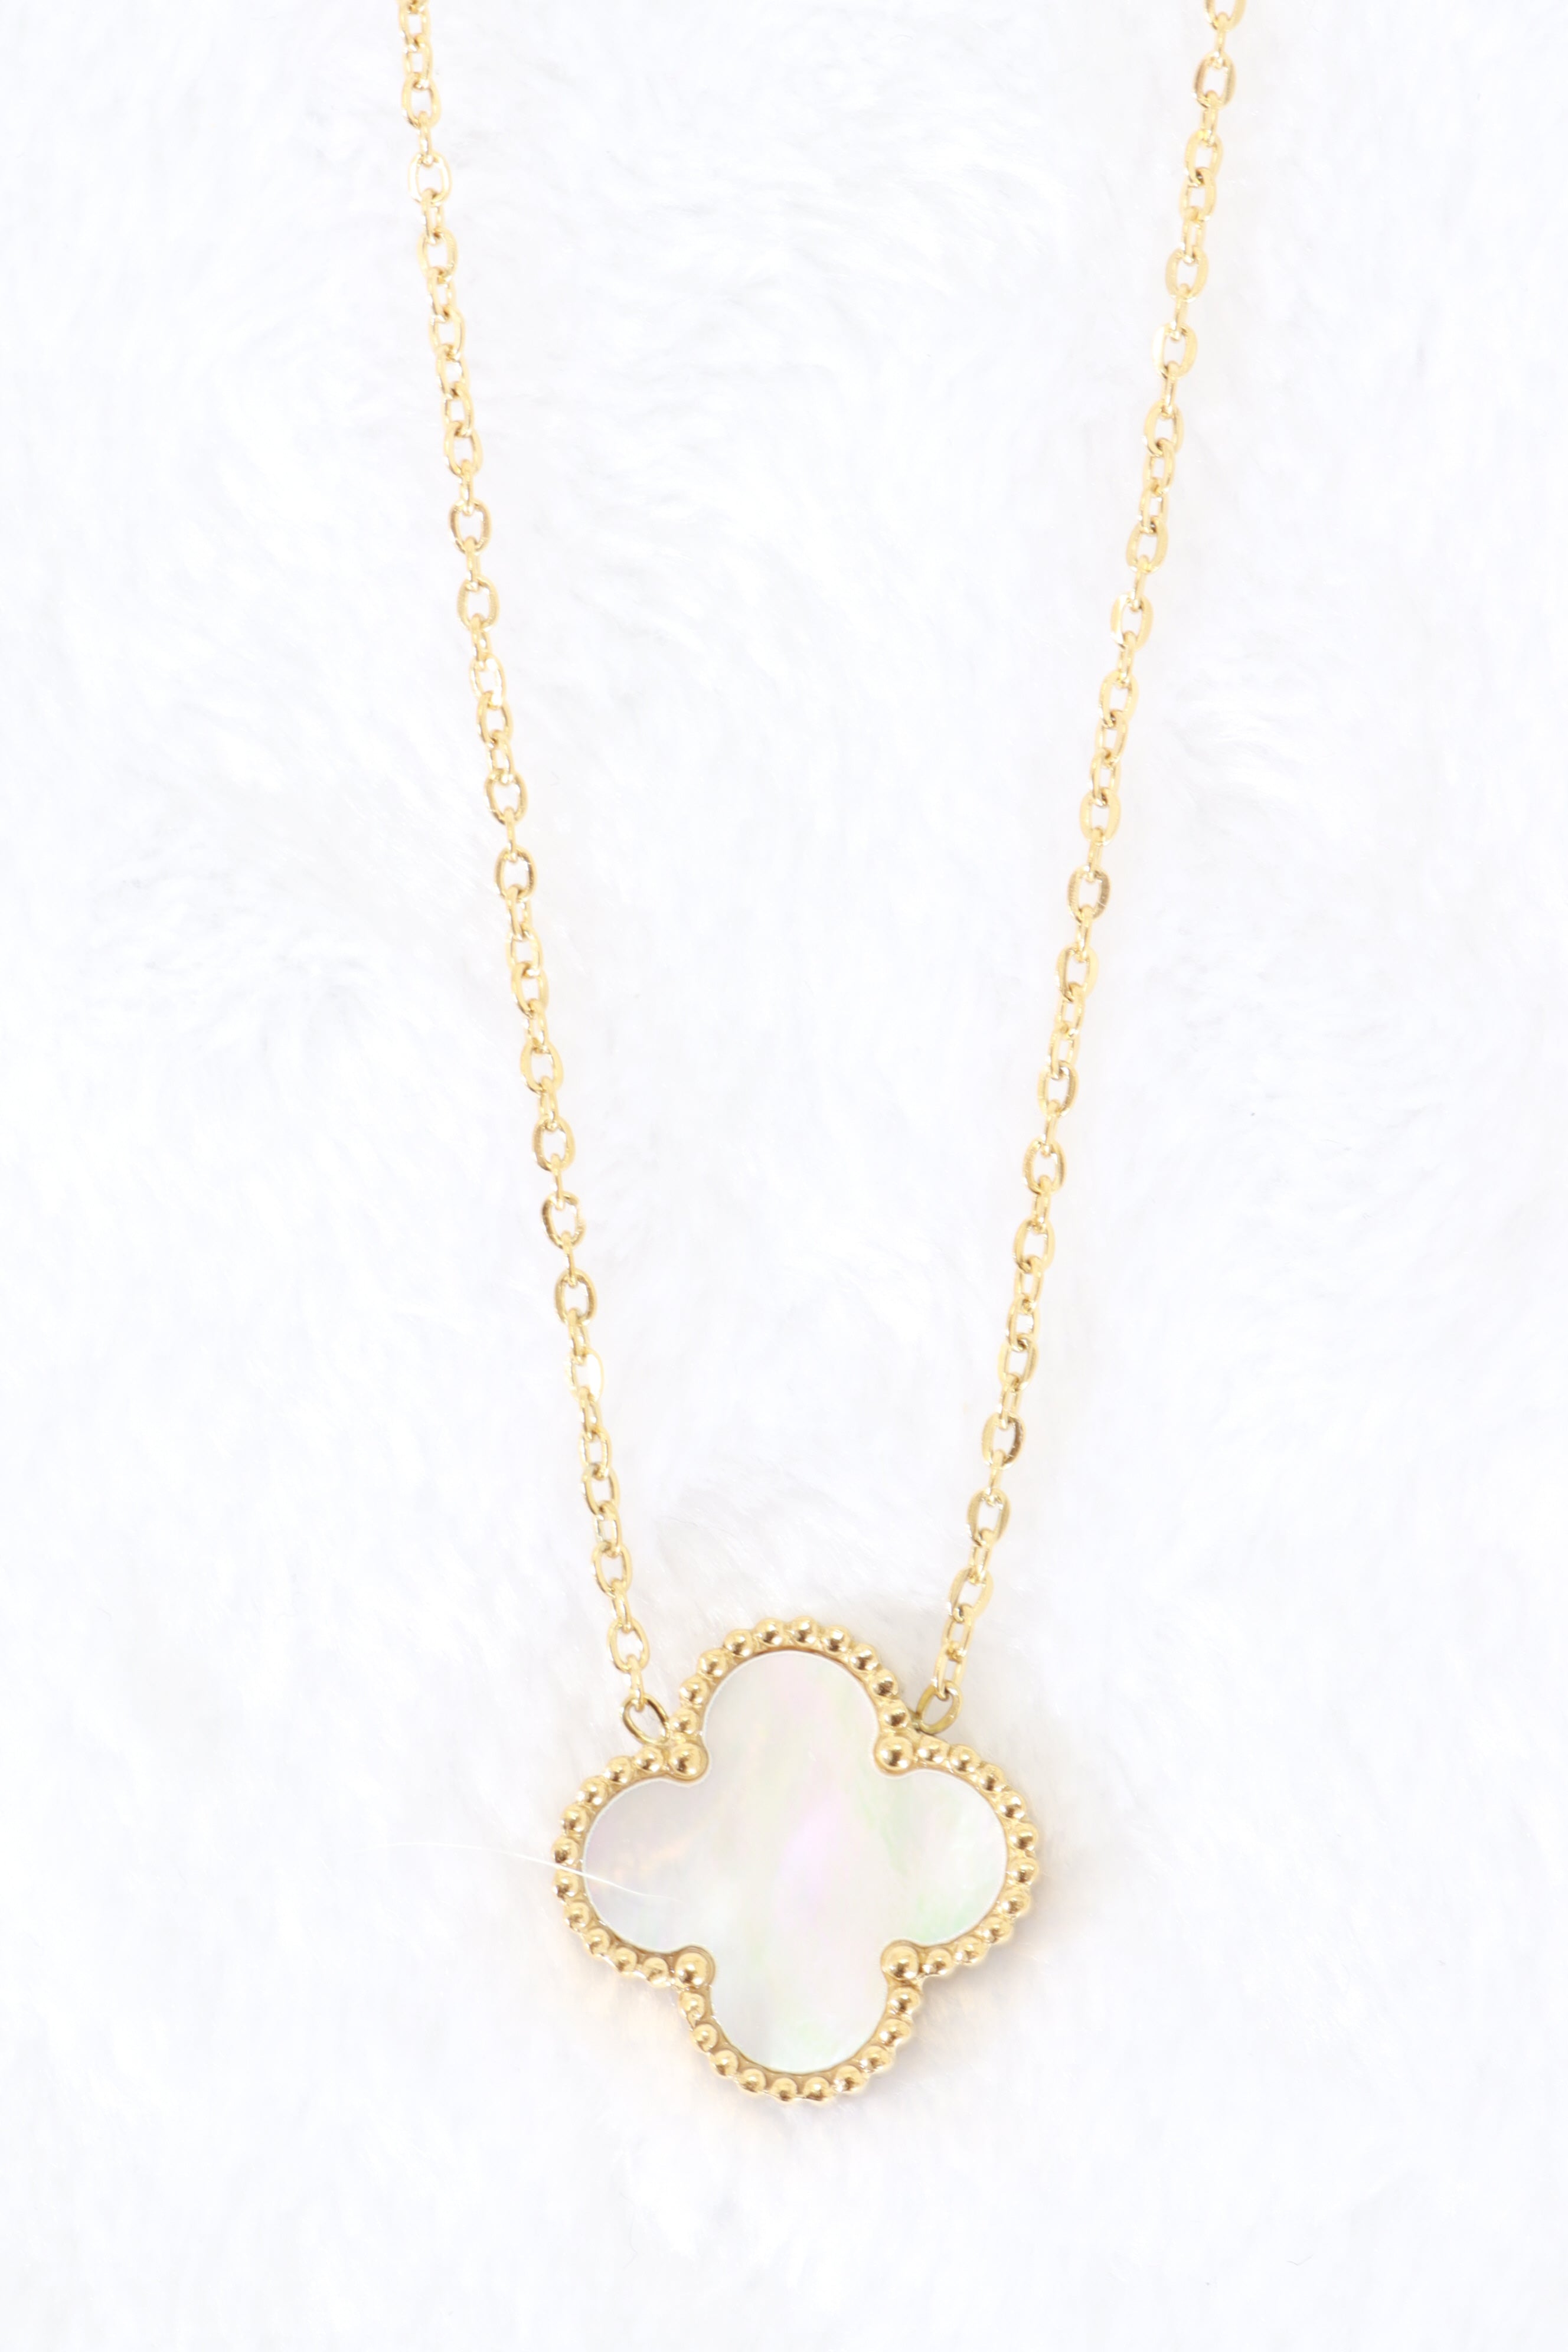 1pc Luxury Light Gold Lucky Clover Pendant Necklace 2023 New Design  Fashionable And Versatile With Exquisite Gift Box, Perfect For Party, Made  Of Stainless Steel For Women's Snake Chain | SHEIN